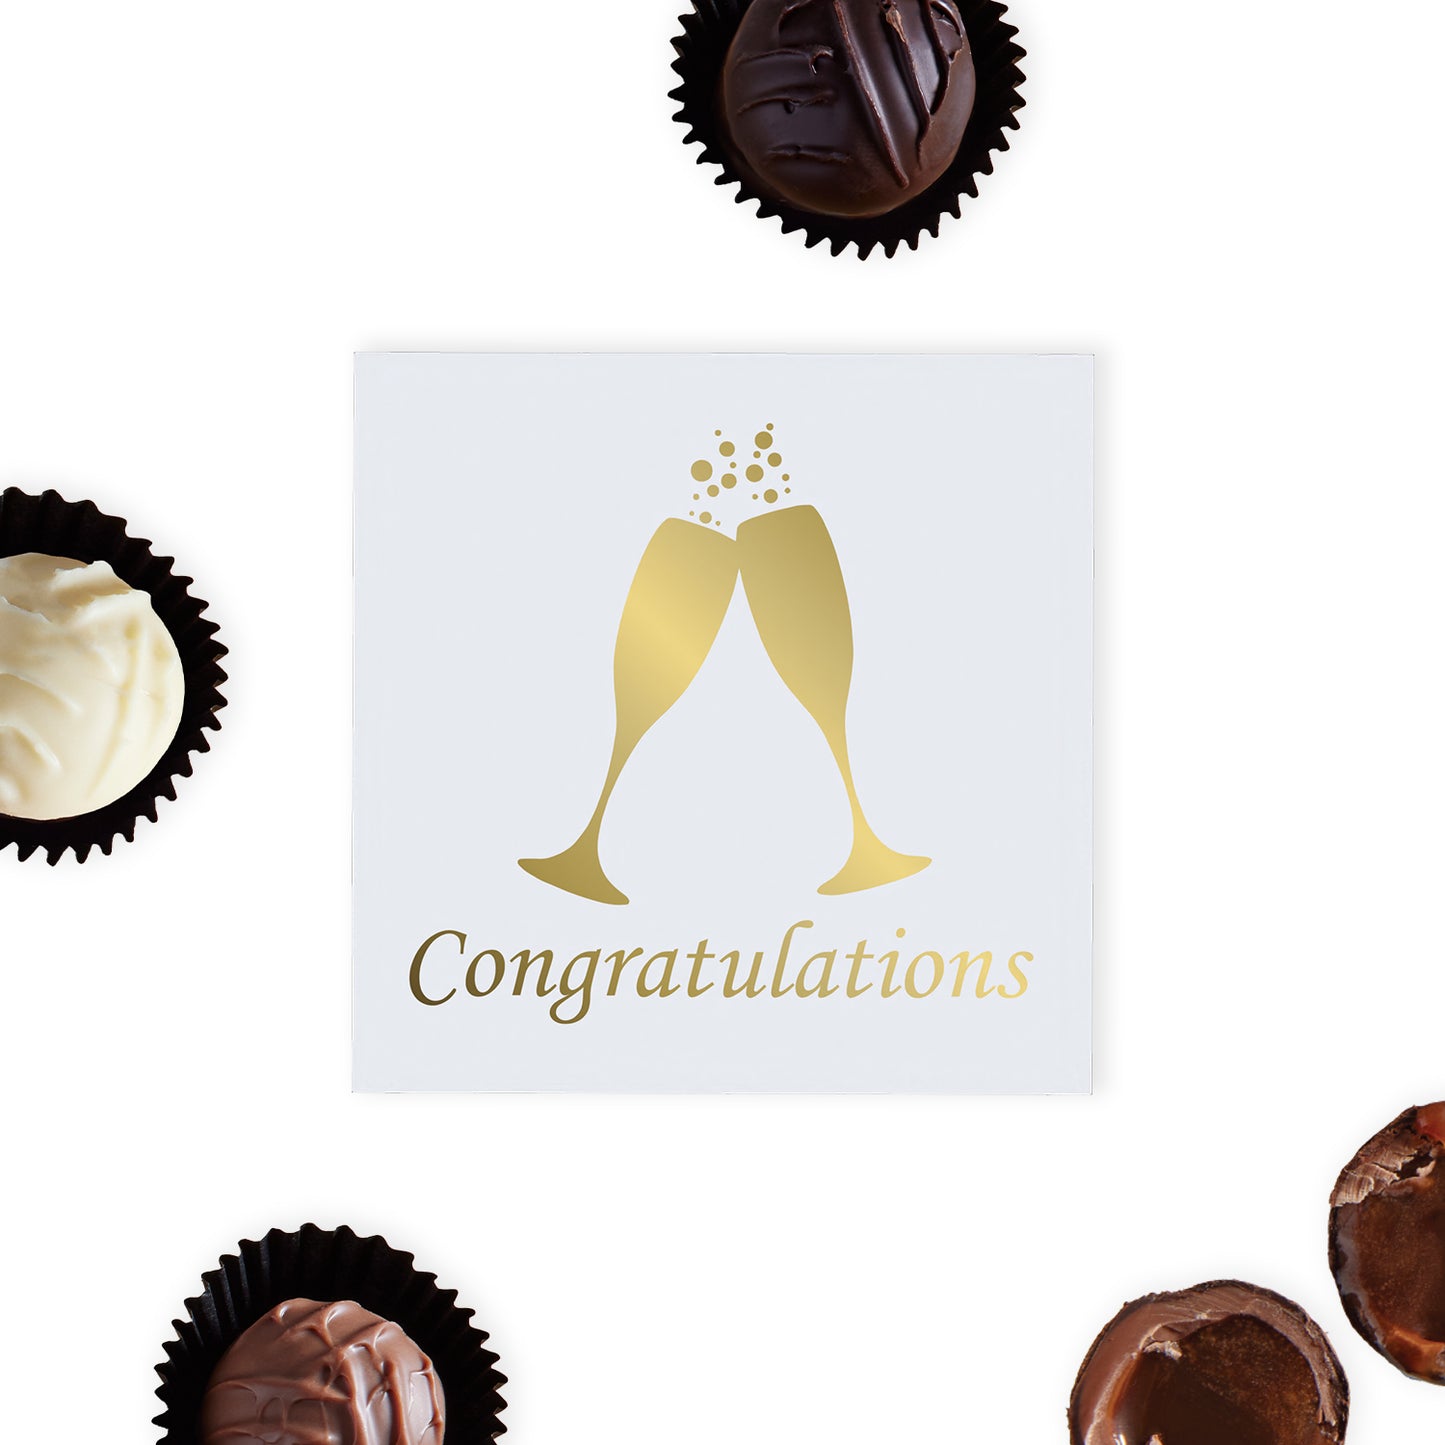 "Congratulations" Chocolate Gift Box, designed to mark every achievement with a touch of Luxury.  This elegant white Luxury box features gold foil-printed champagne glasses and the word "Congratulations," making it a sophisticated choice for any congratulatory occasion.  Inside, recipients will find four exquisite hand-finished truffles, assorted milk, dark and white truffles